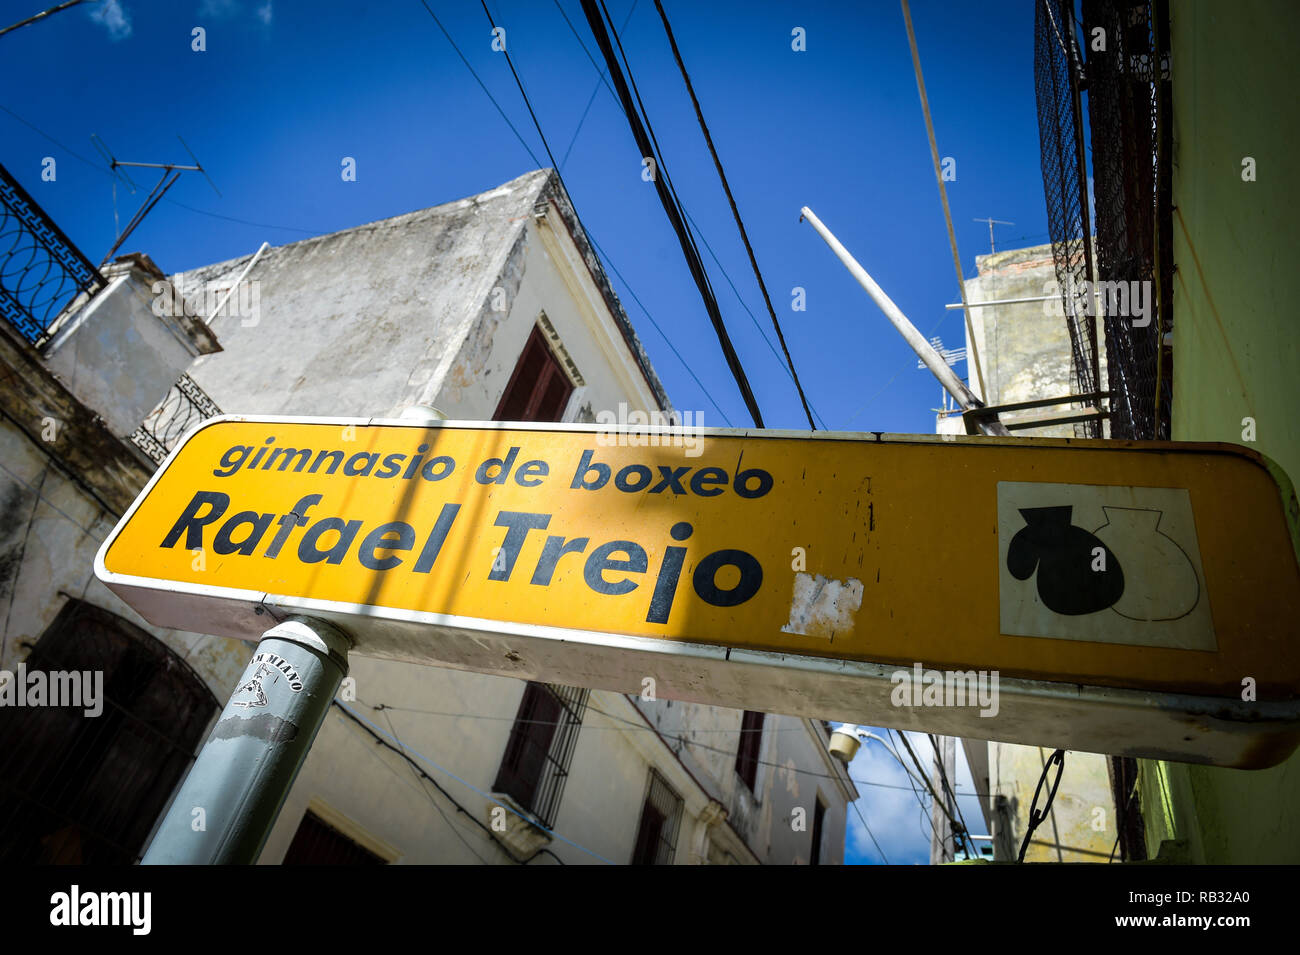 Havana, Havana, Cuba. 9th Oct, 2018. The Rafael Trejo training camp sign in Havana, Cuba which is famous for producing several Olympic champions.Cuban boxers are the most successful in the history of amateur boxing, Cuba has won 32 Olympic boxing gold medals since 1972, .In 1962, professional boxing in Cuba was banned by Fidel Castro. As a consequence of Castro's ban, if fighters want to pursue their dream of becoming world champions they have to make the heartbreaking decision to defect from the country and It can be very tough for them because they are excommunicated and separated from Stock Photo